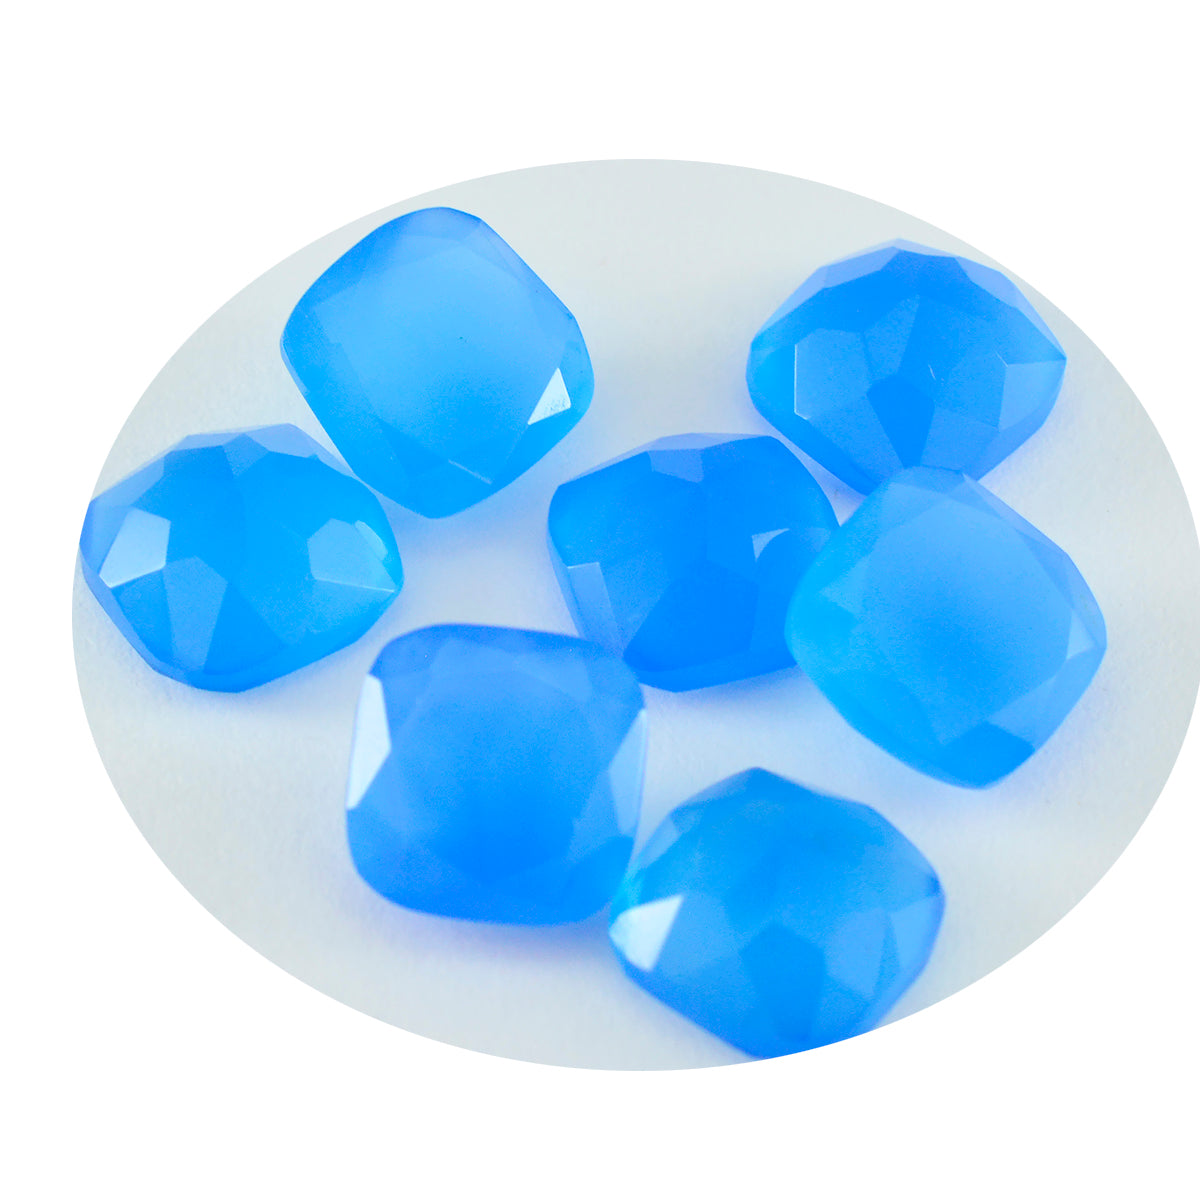 Riyogems 1PC Natural Blue Chalcedony Faceted 7x7 mm Cushion Shape attractive Quality Loose Gemstone